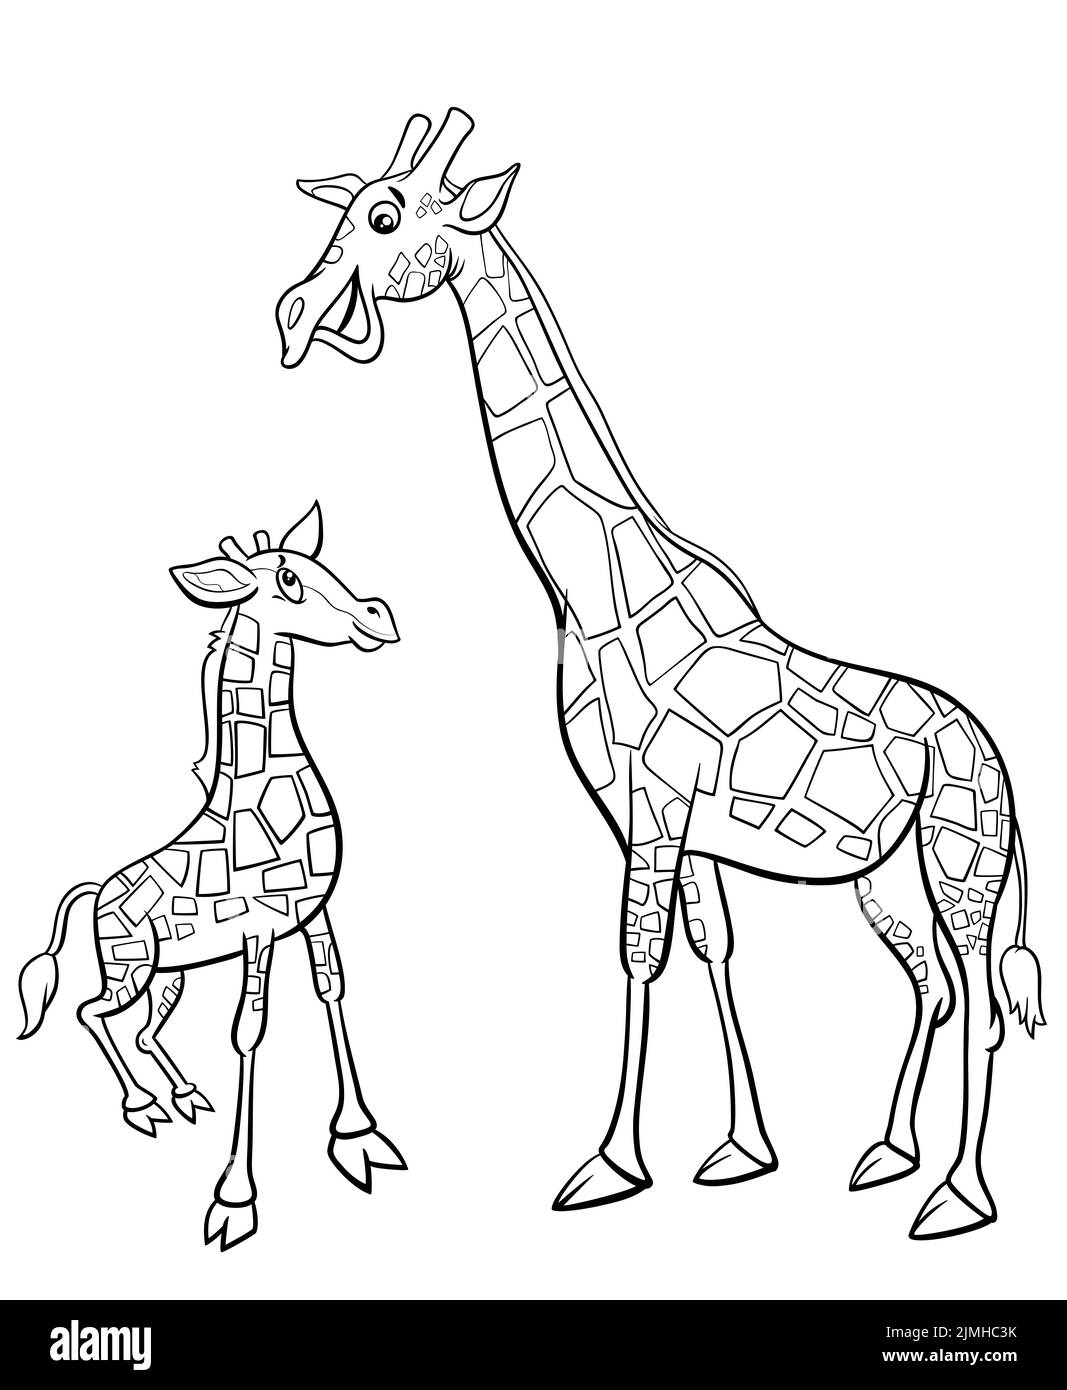 Cartoon baby giraffe with mother coloring book page Stock Photo